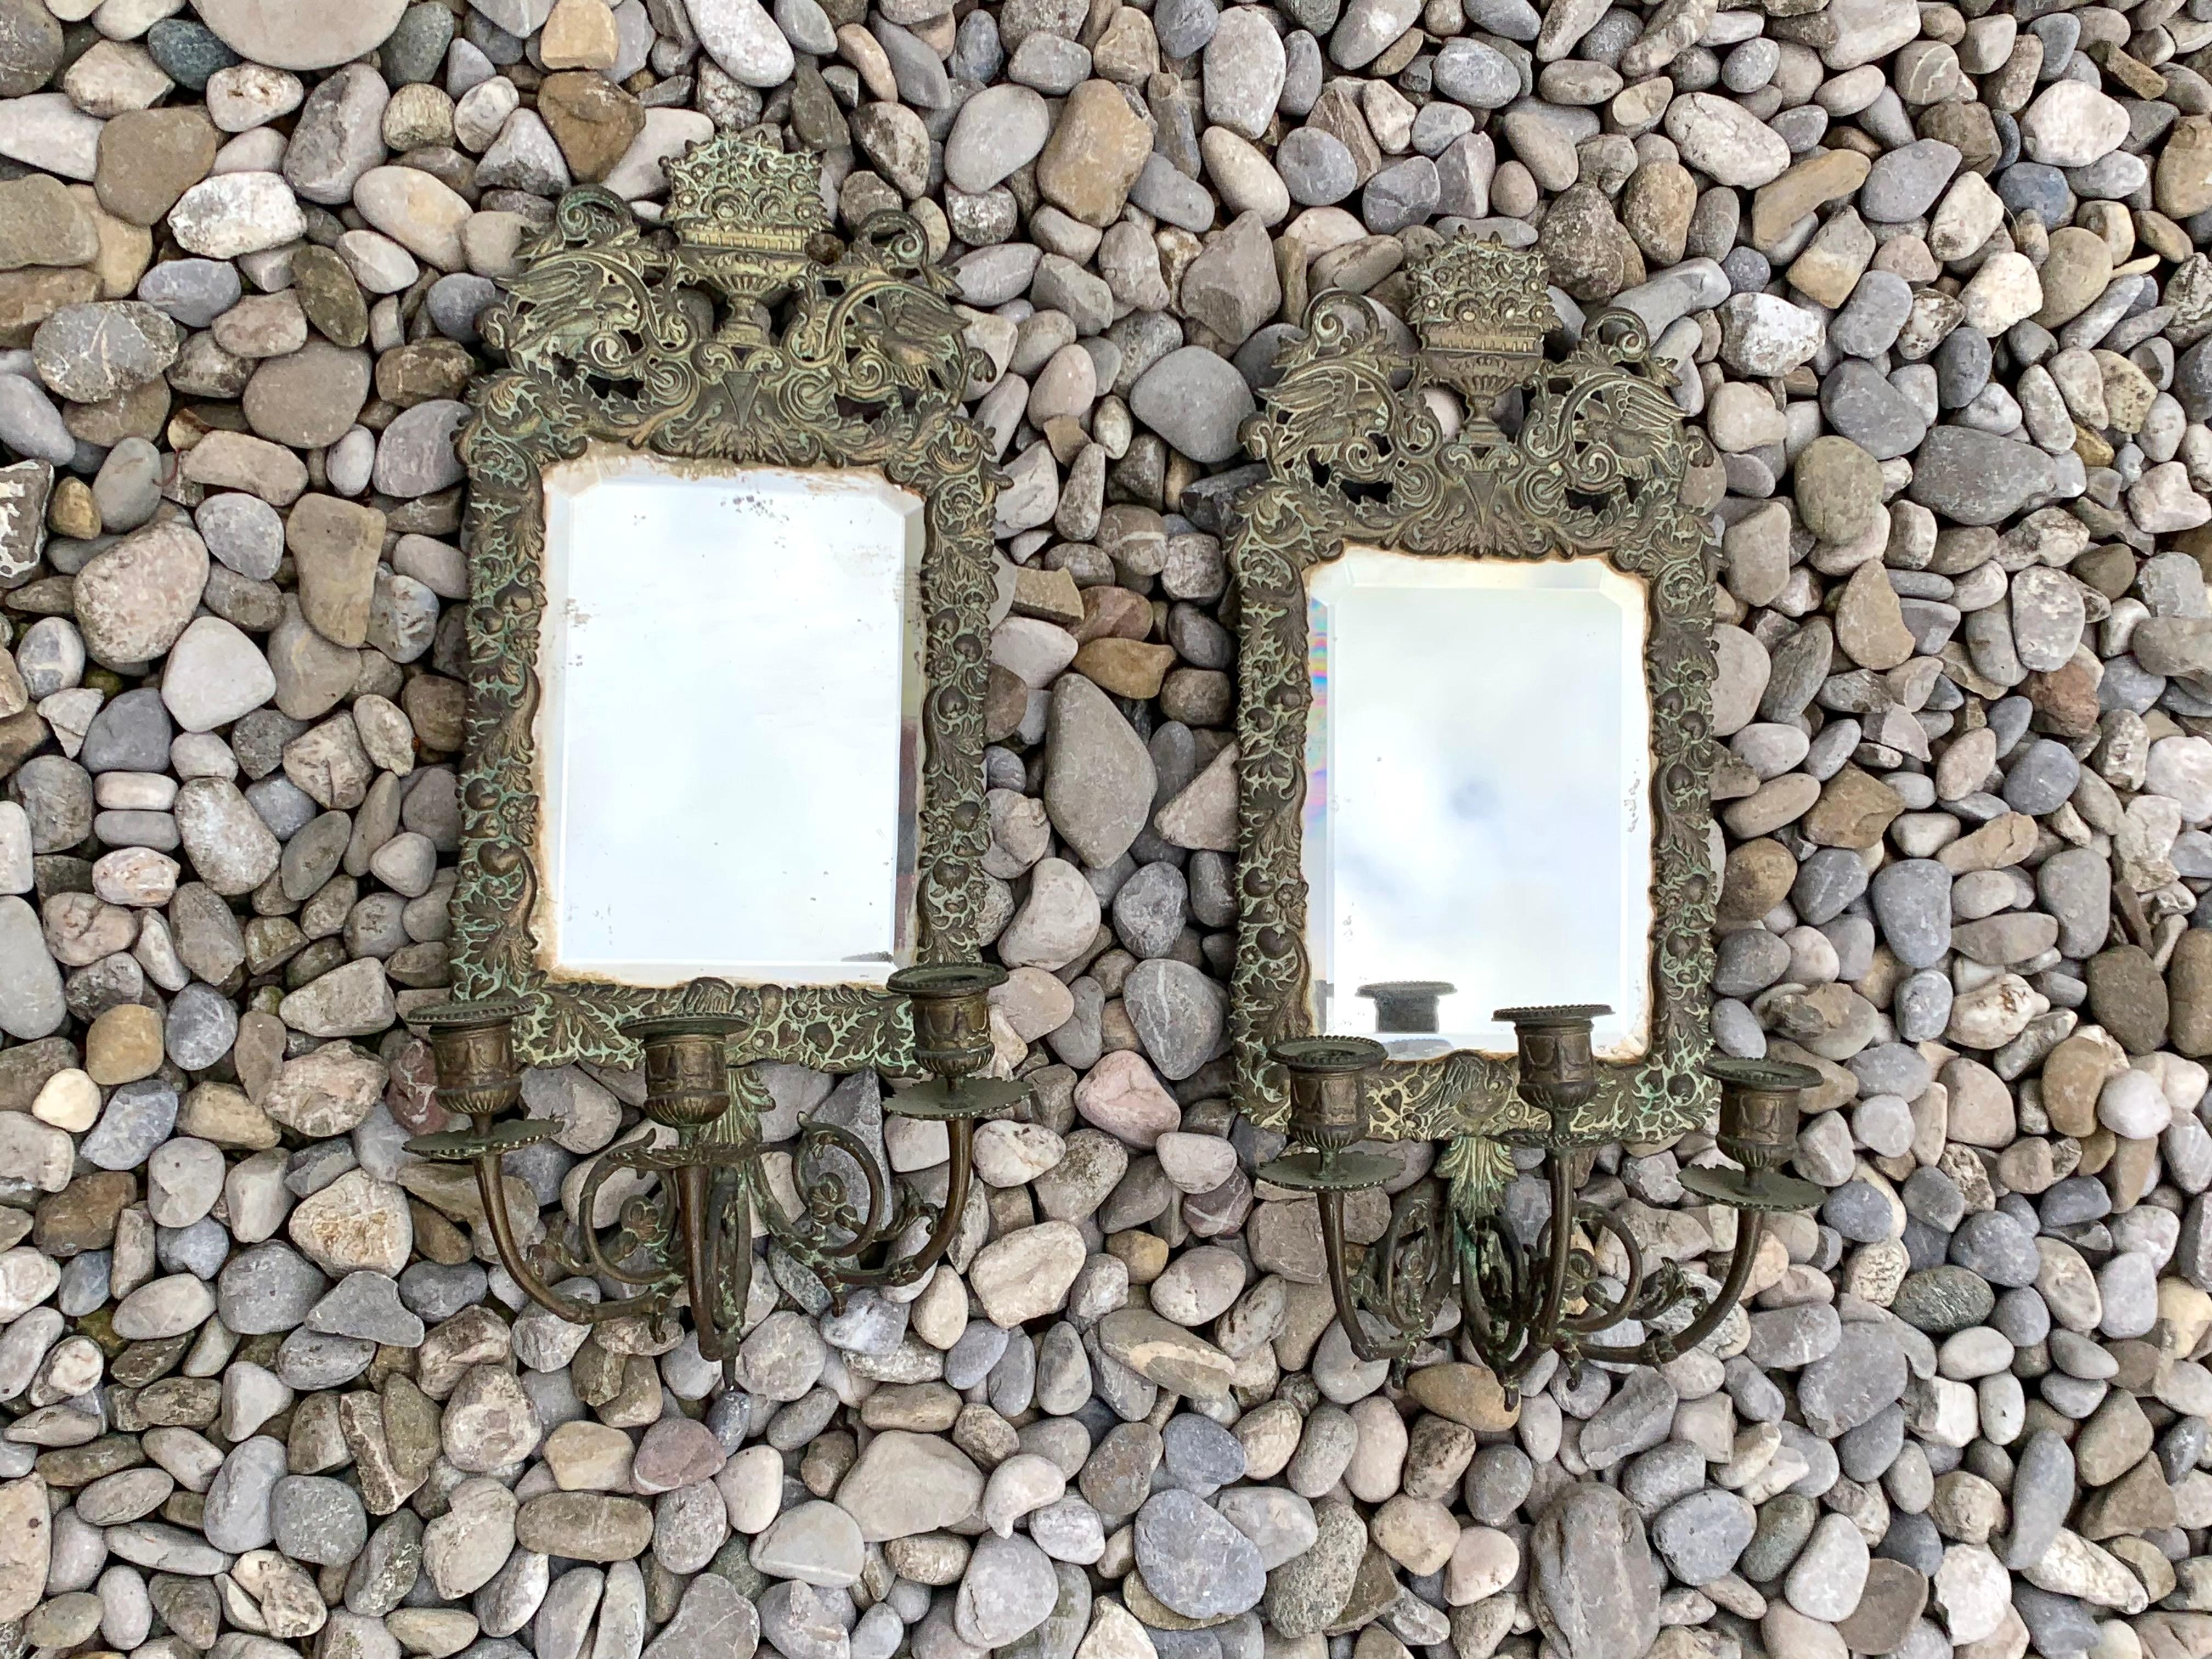 This pair of 18th centurty repoussé brass walls sconces has retained it's original condition and patina as well as the original mirror glass. A pair of eagles surround a basket full of flowers. The mirrors are surrounded by fruits, leaves and